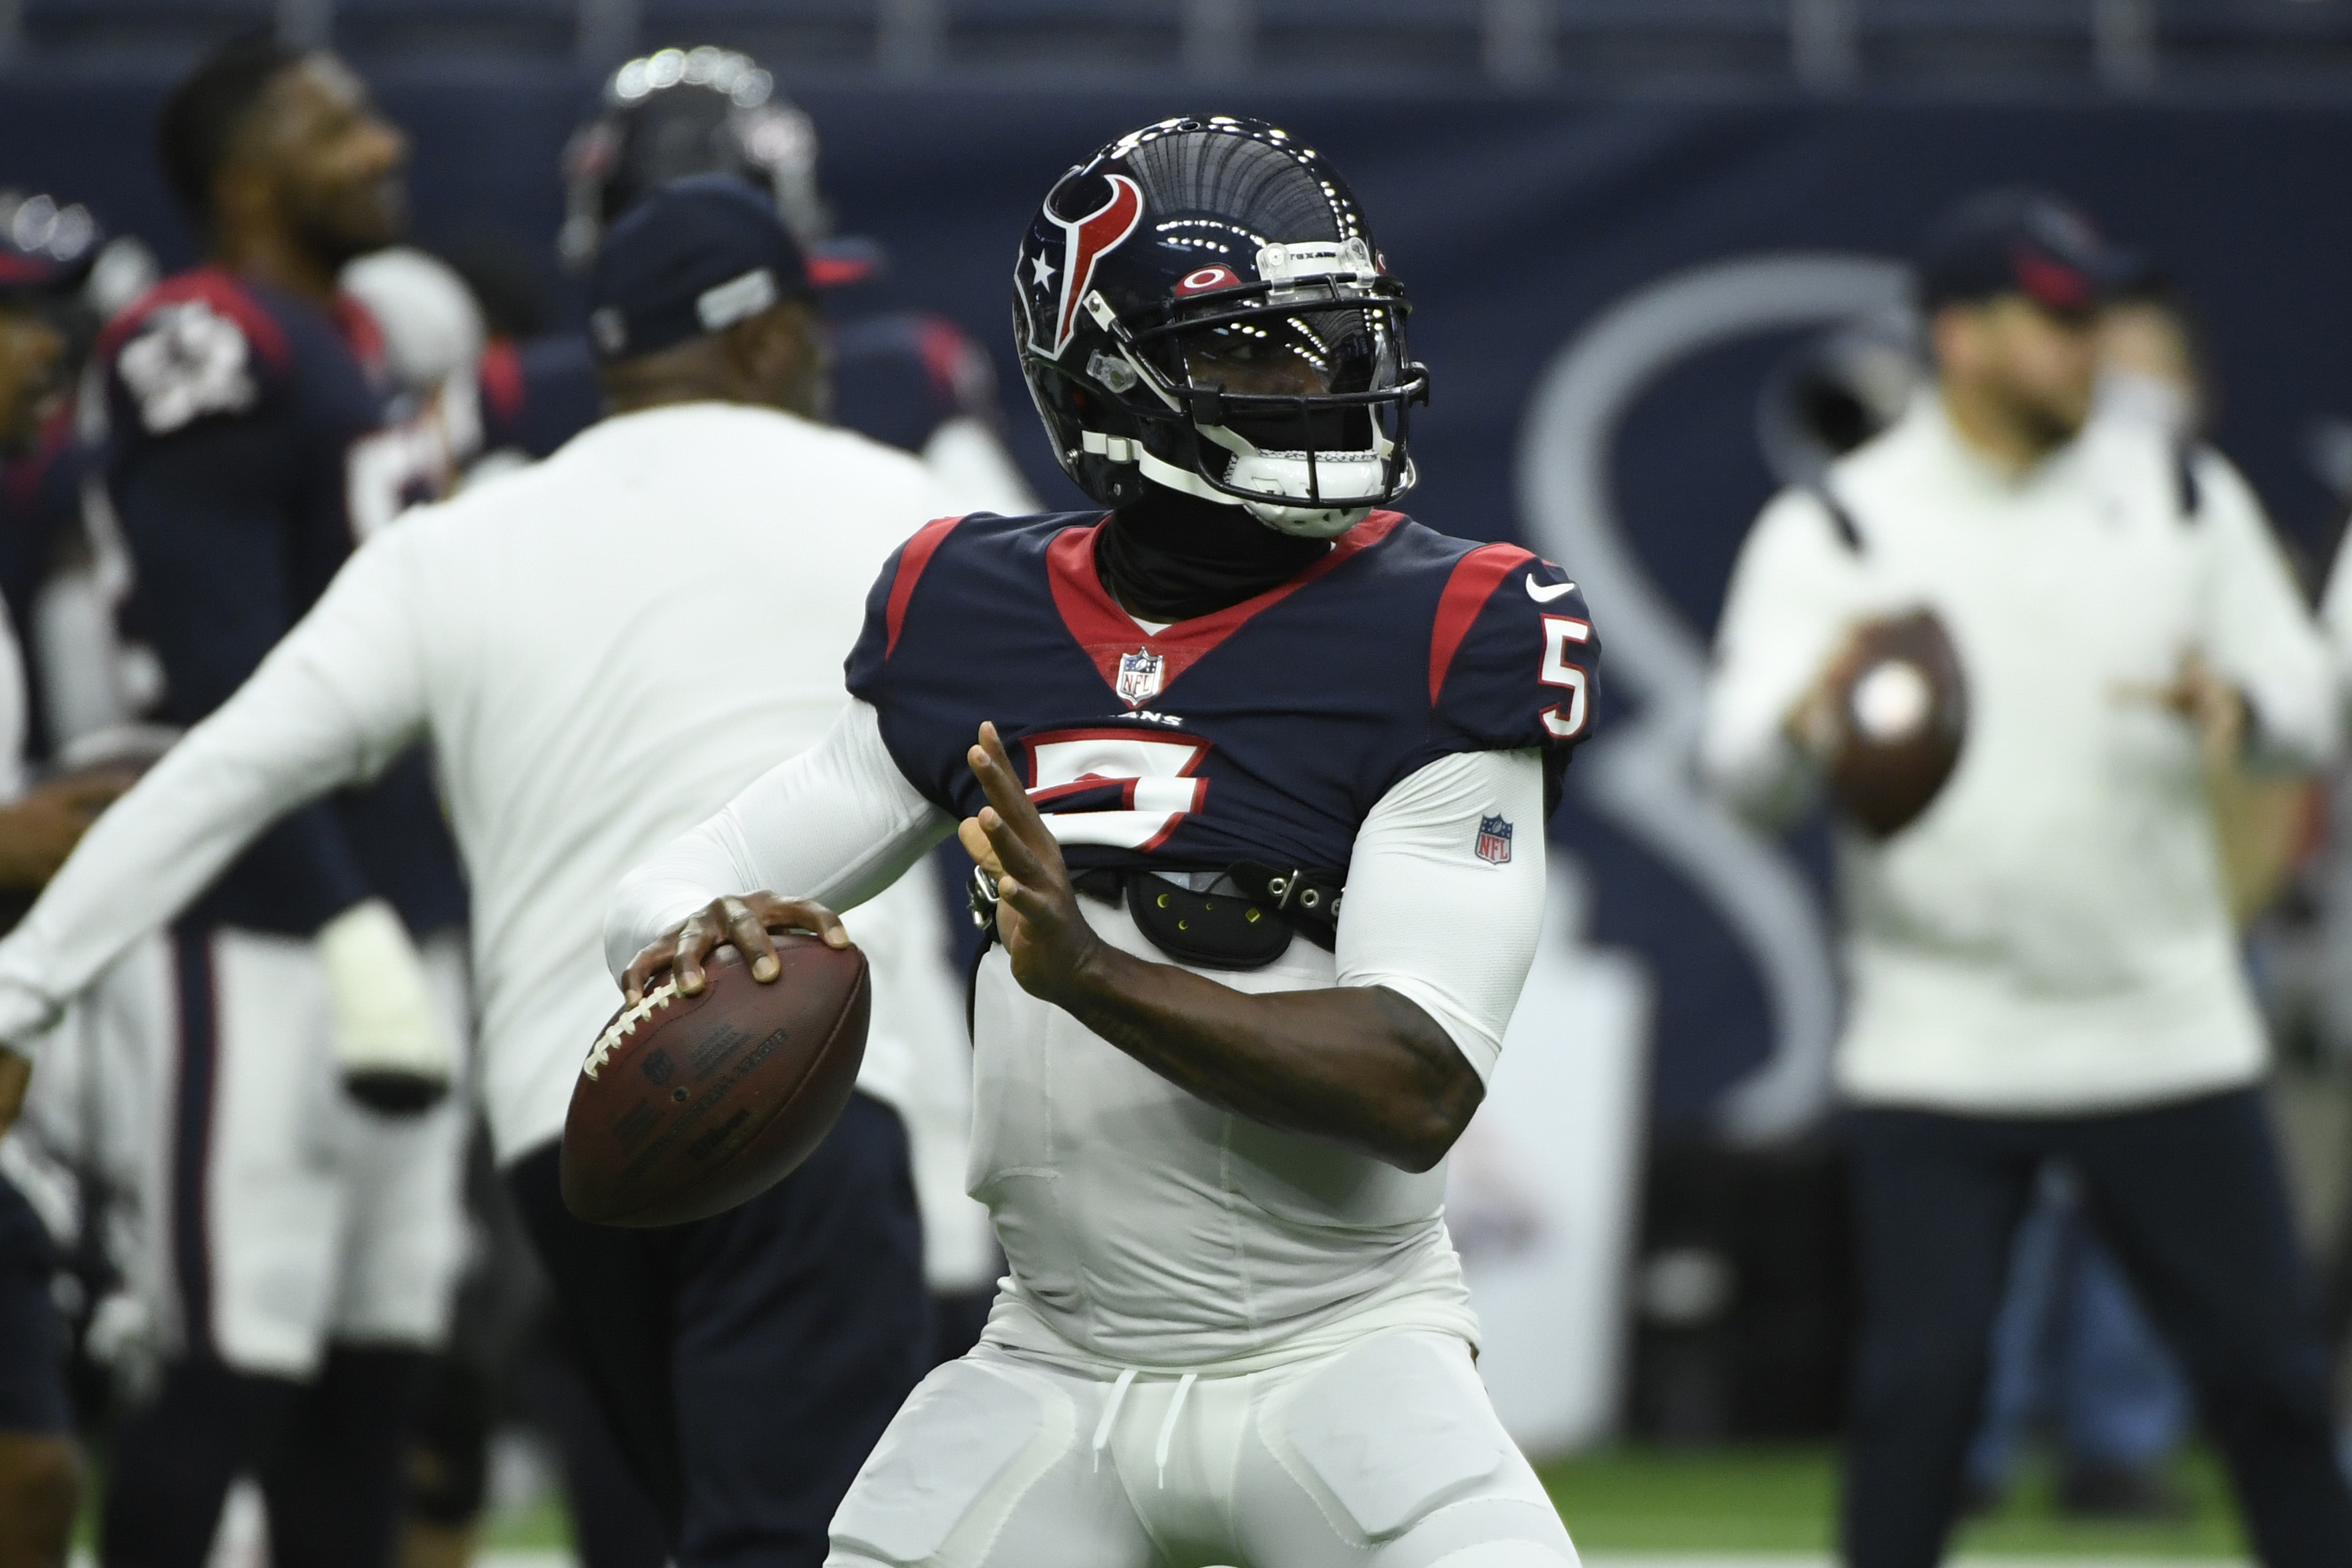 2022 NFL free agency: Giants expected to sign QB Tyrod Taylor